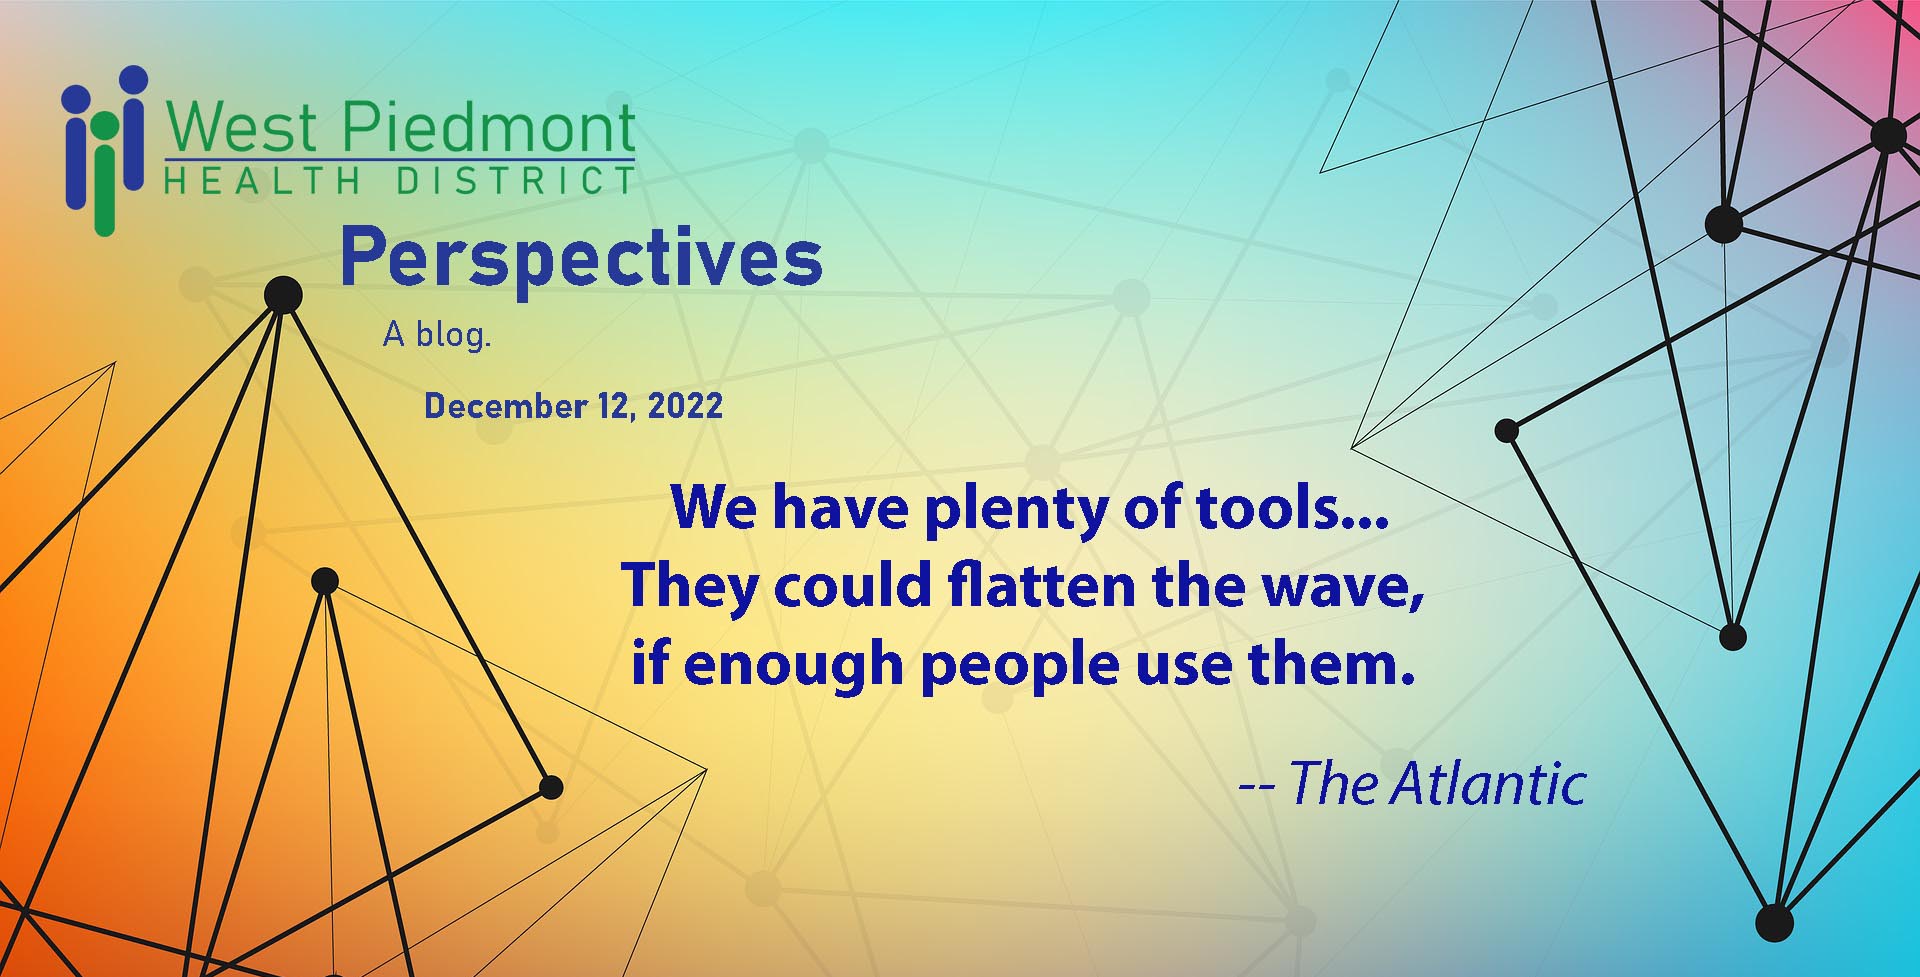 Perspective cover quote: "We have plenty of tools. They could flatten the curve, if enough people would use them." The Atlantic